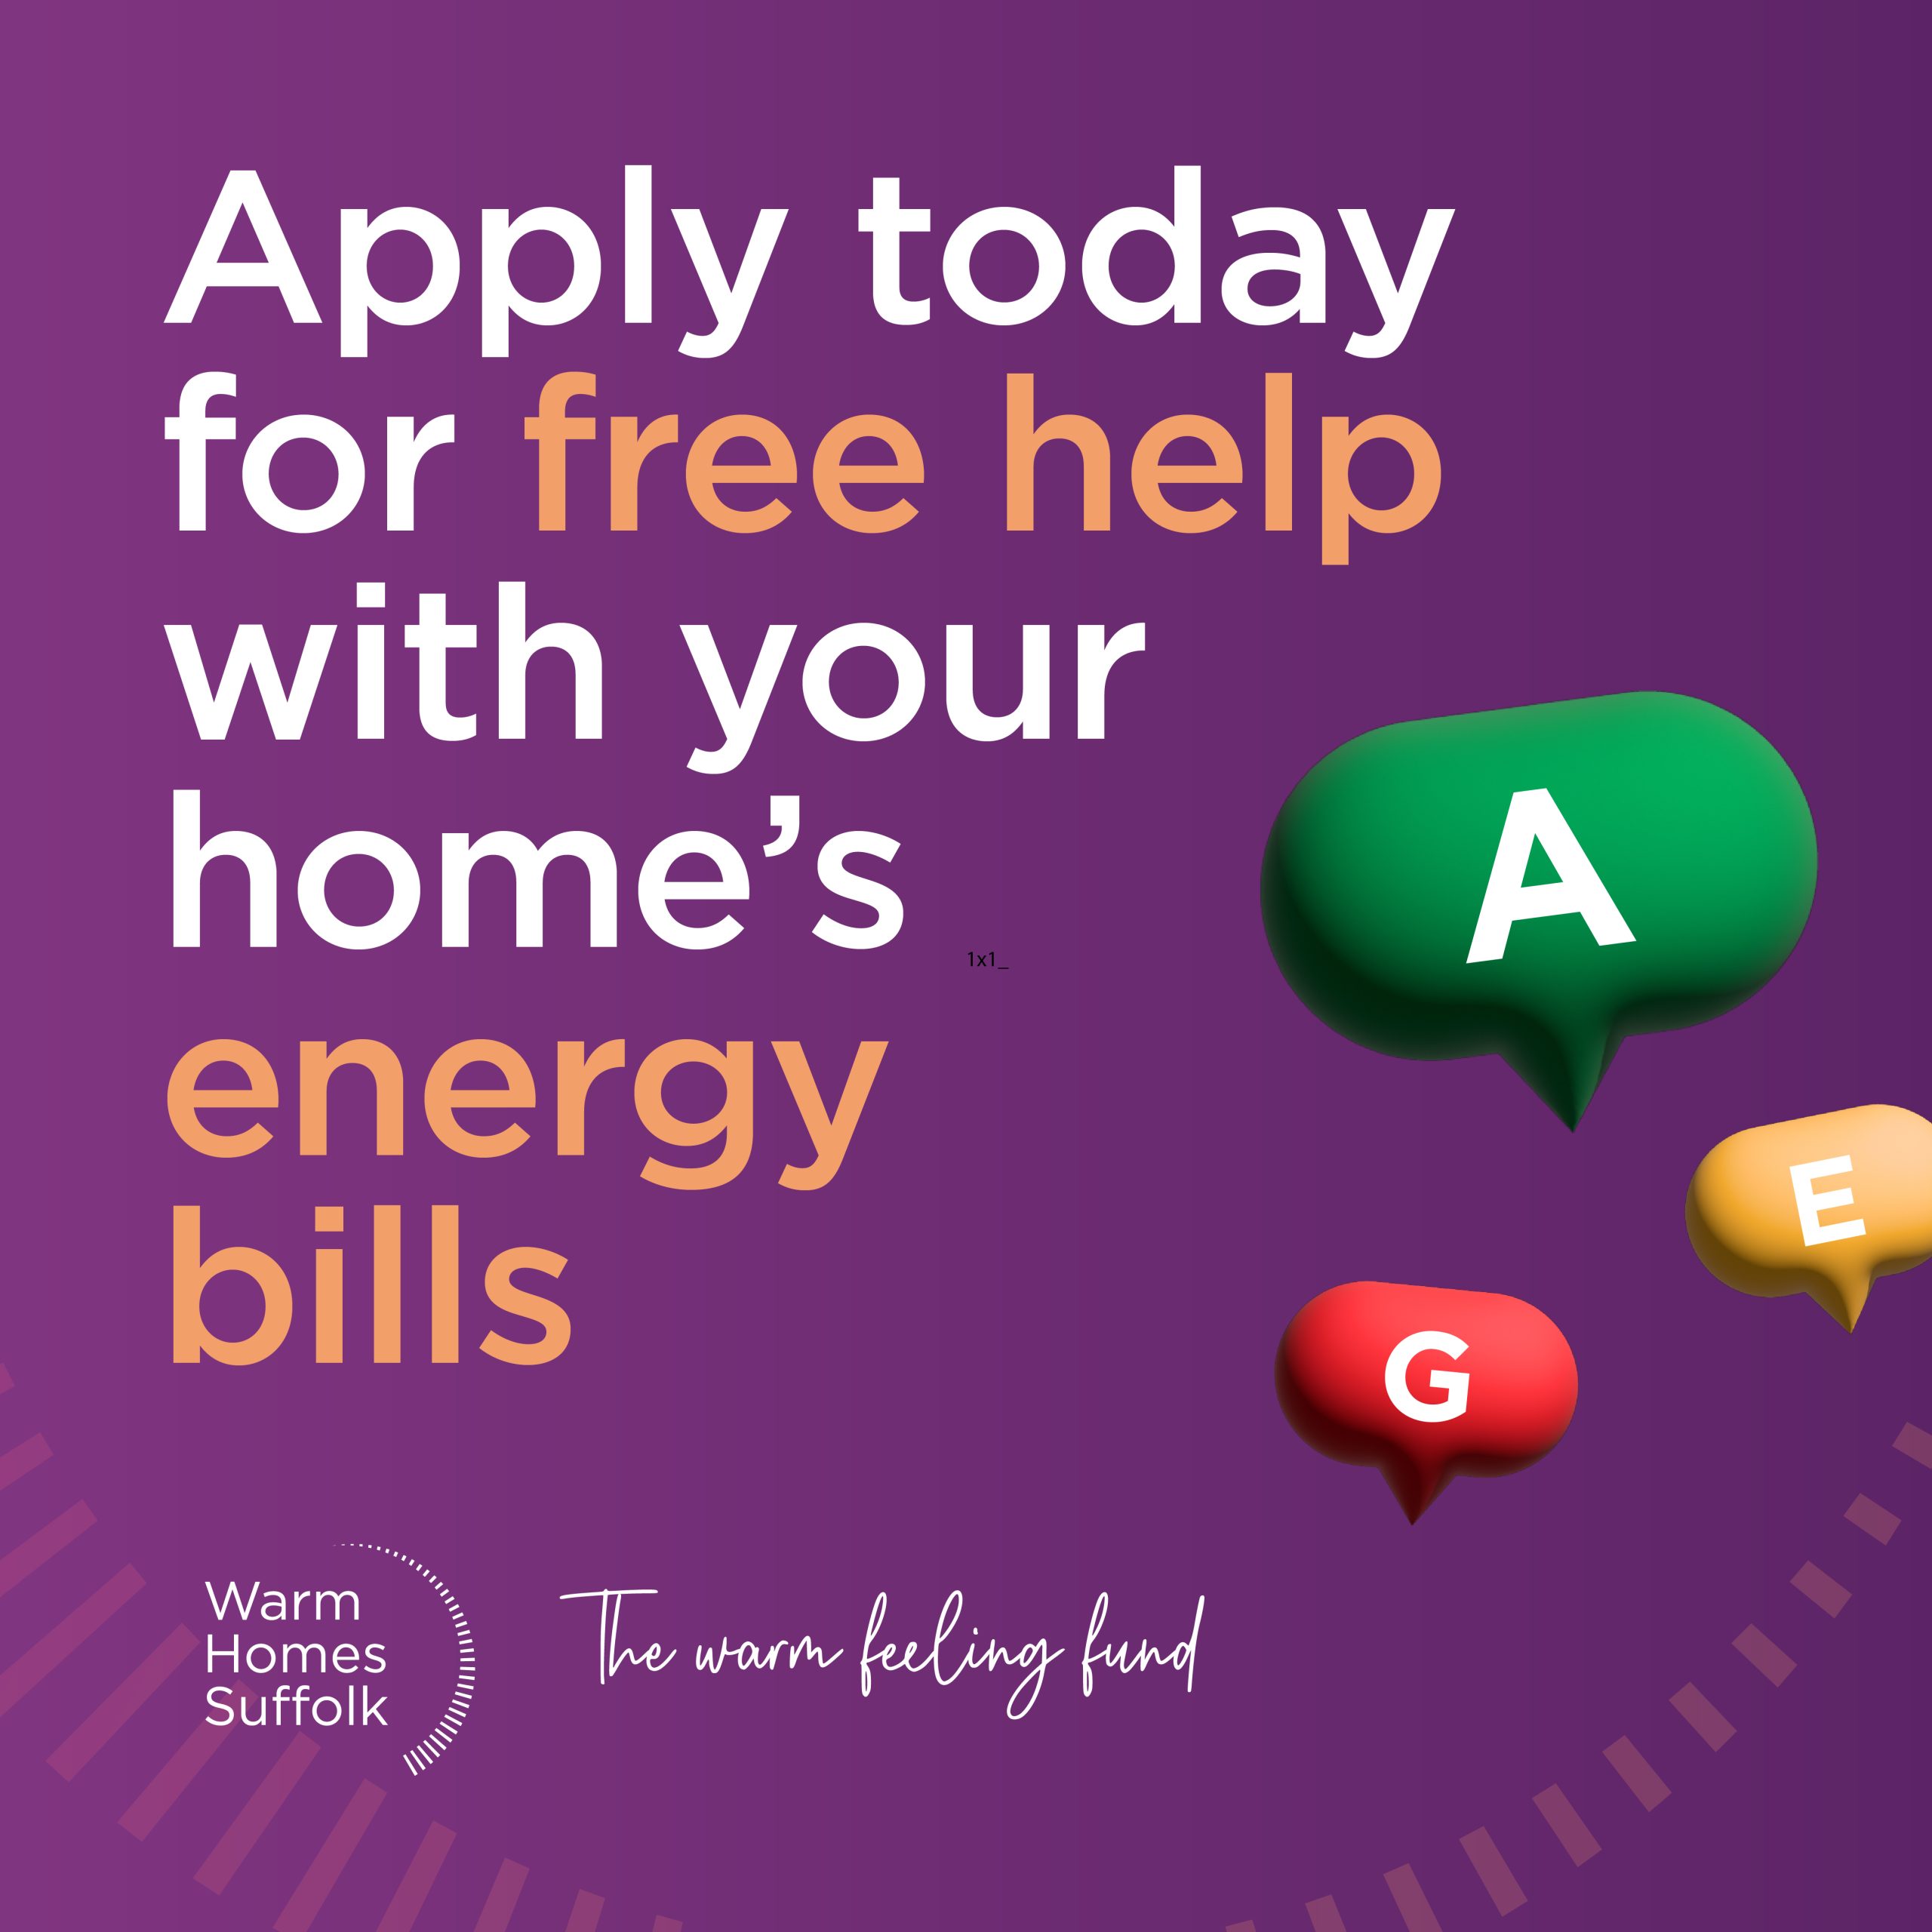 An advert reading "Apply today for free help with your home's energy bills".